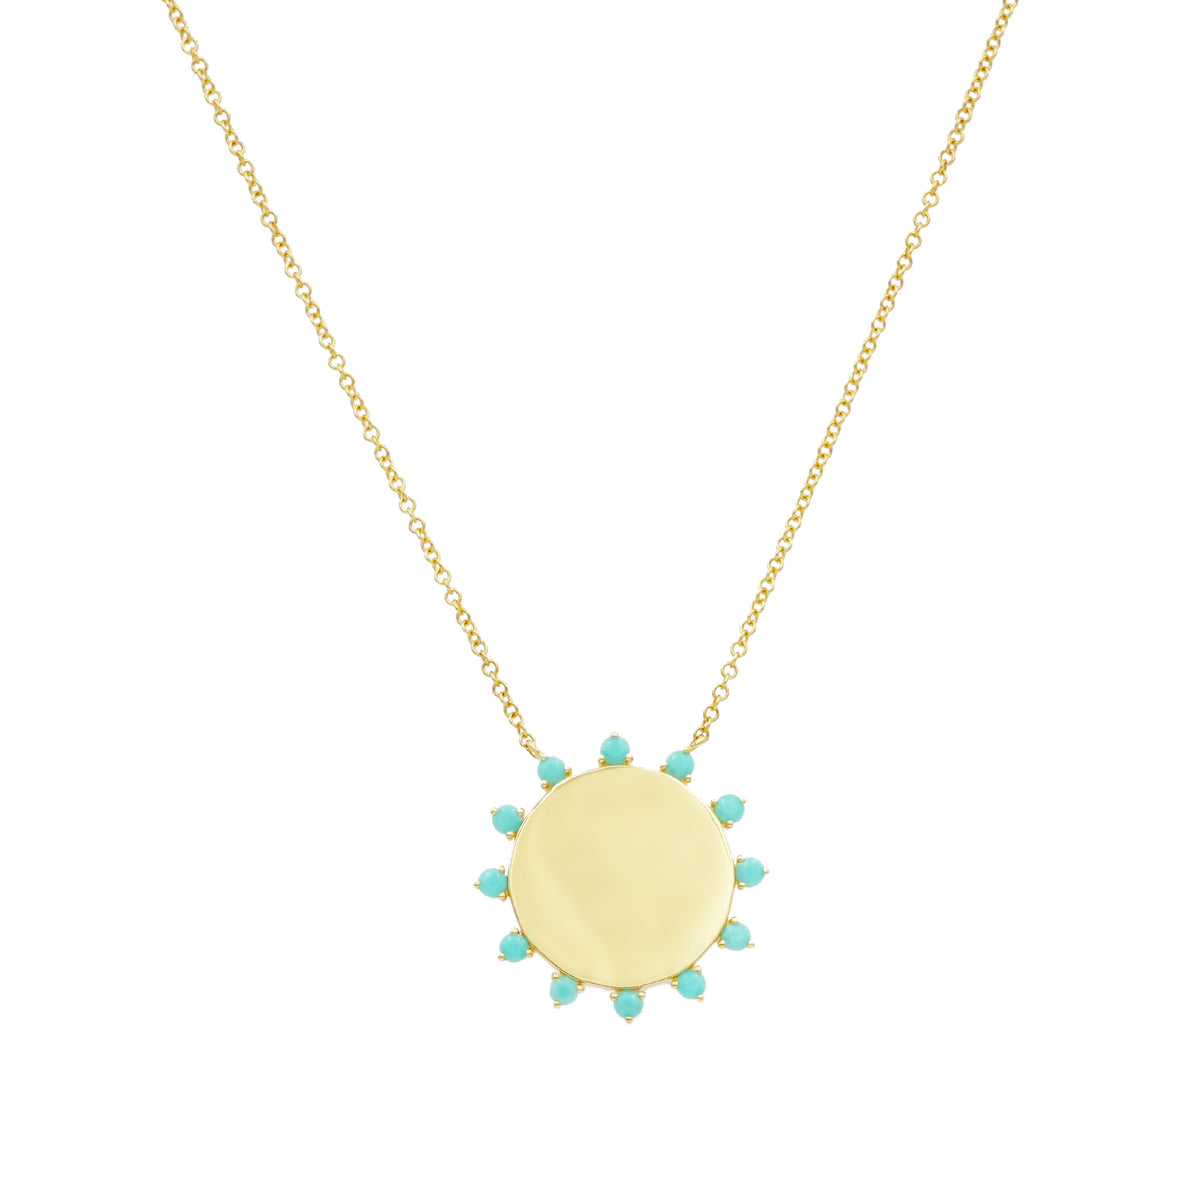 Solid Gold Disc Necklace with Turquoise Detail